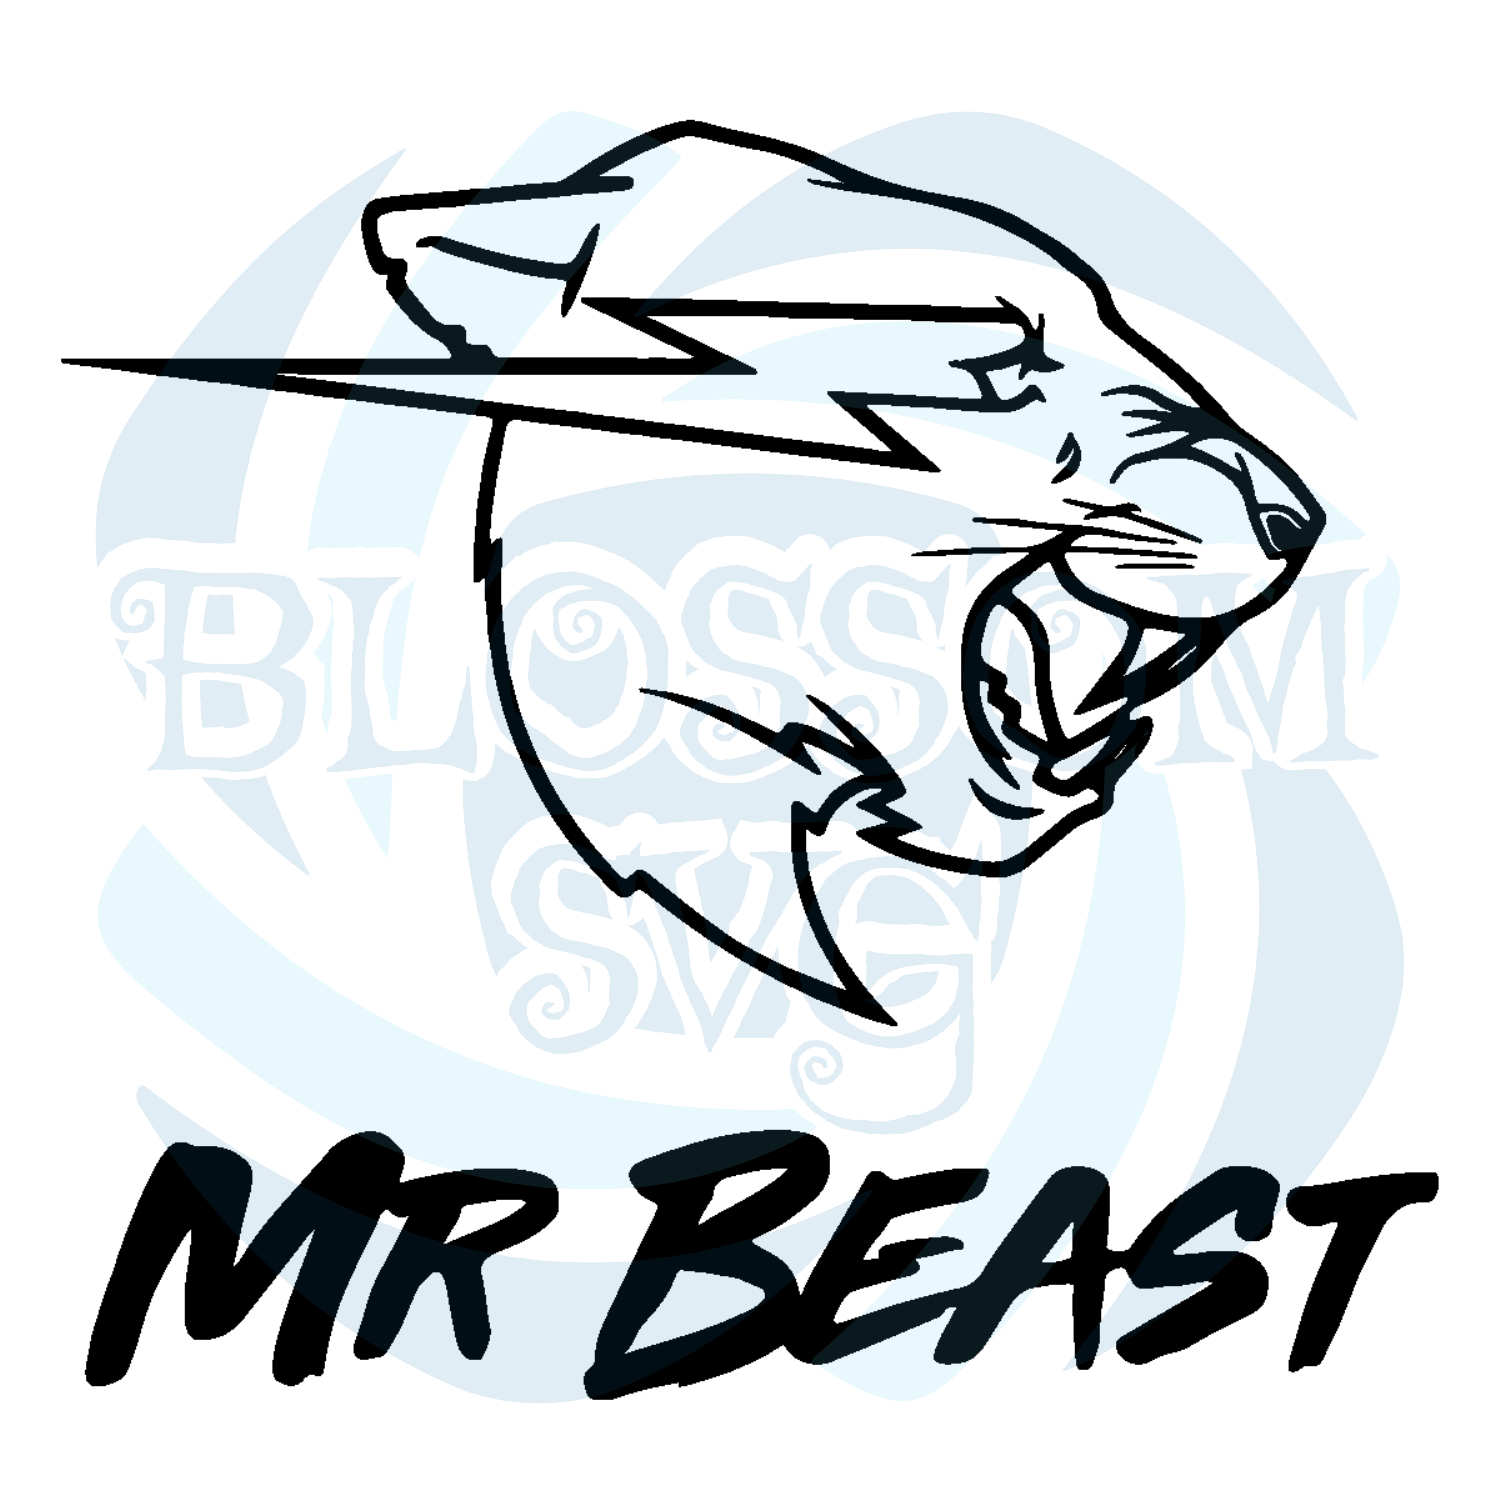 Will be the Mr Beast Local casino Application or Giveaways Legitimate and Safer?